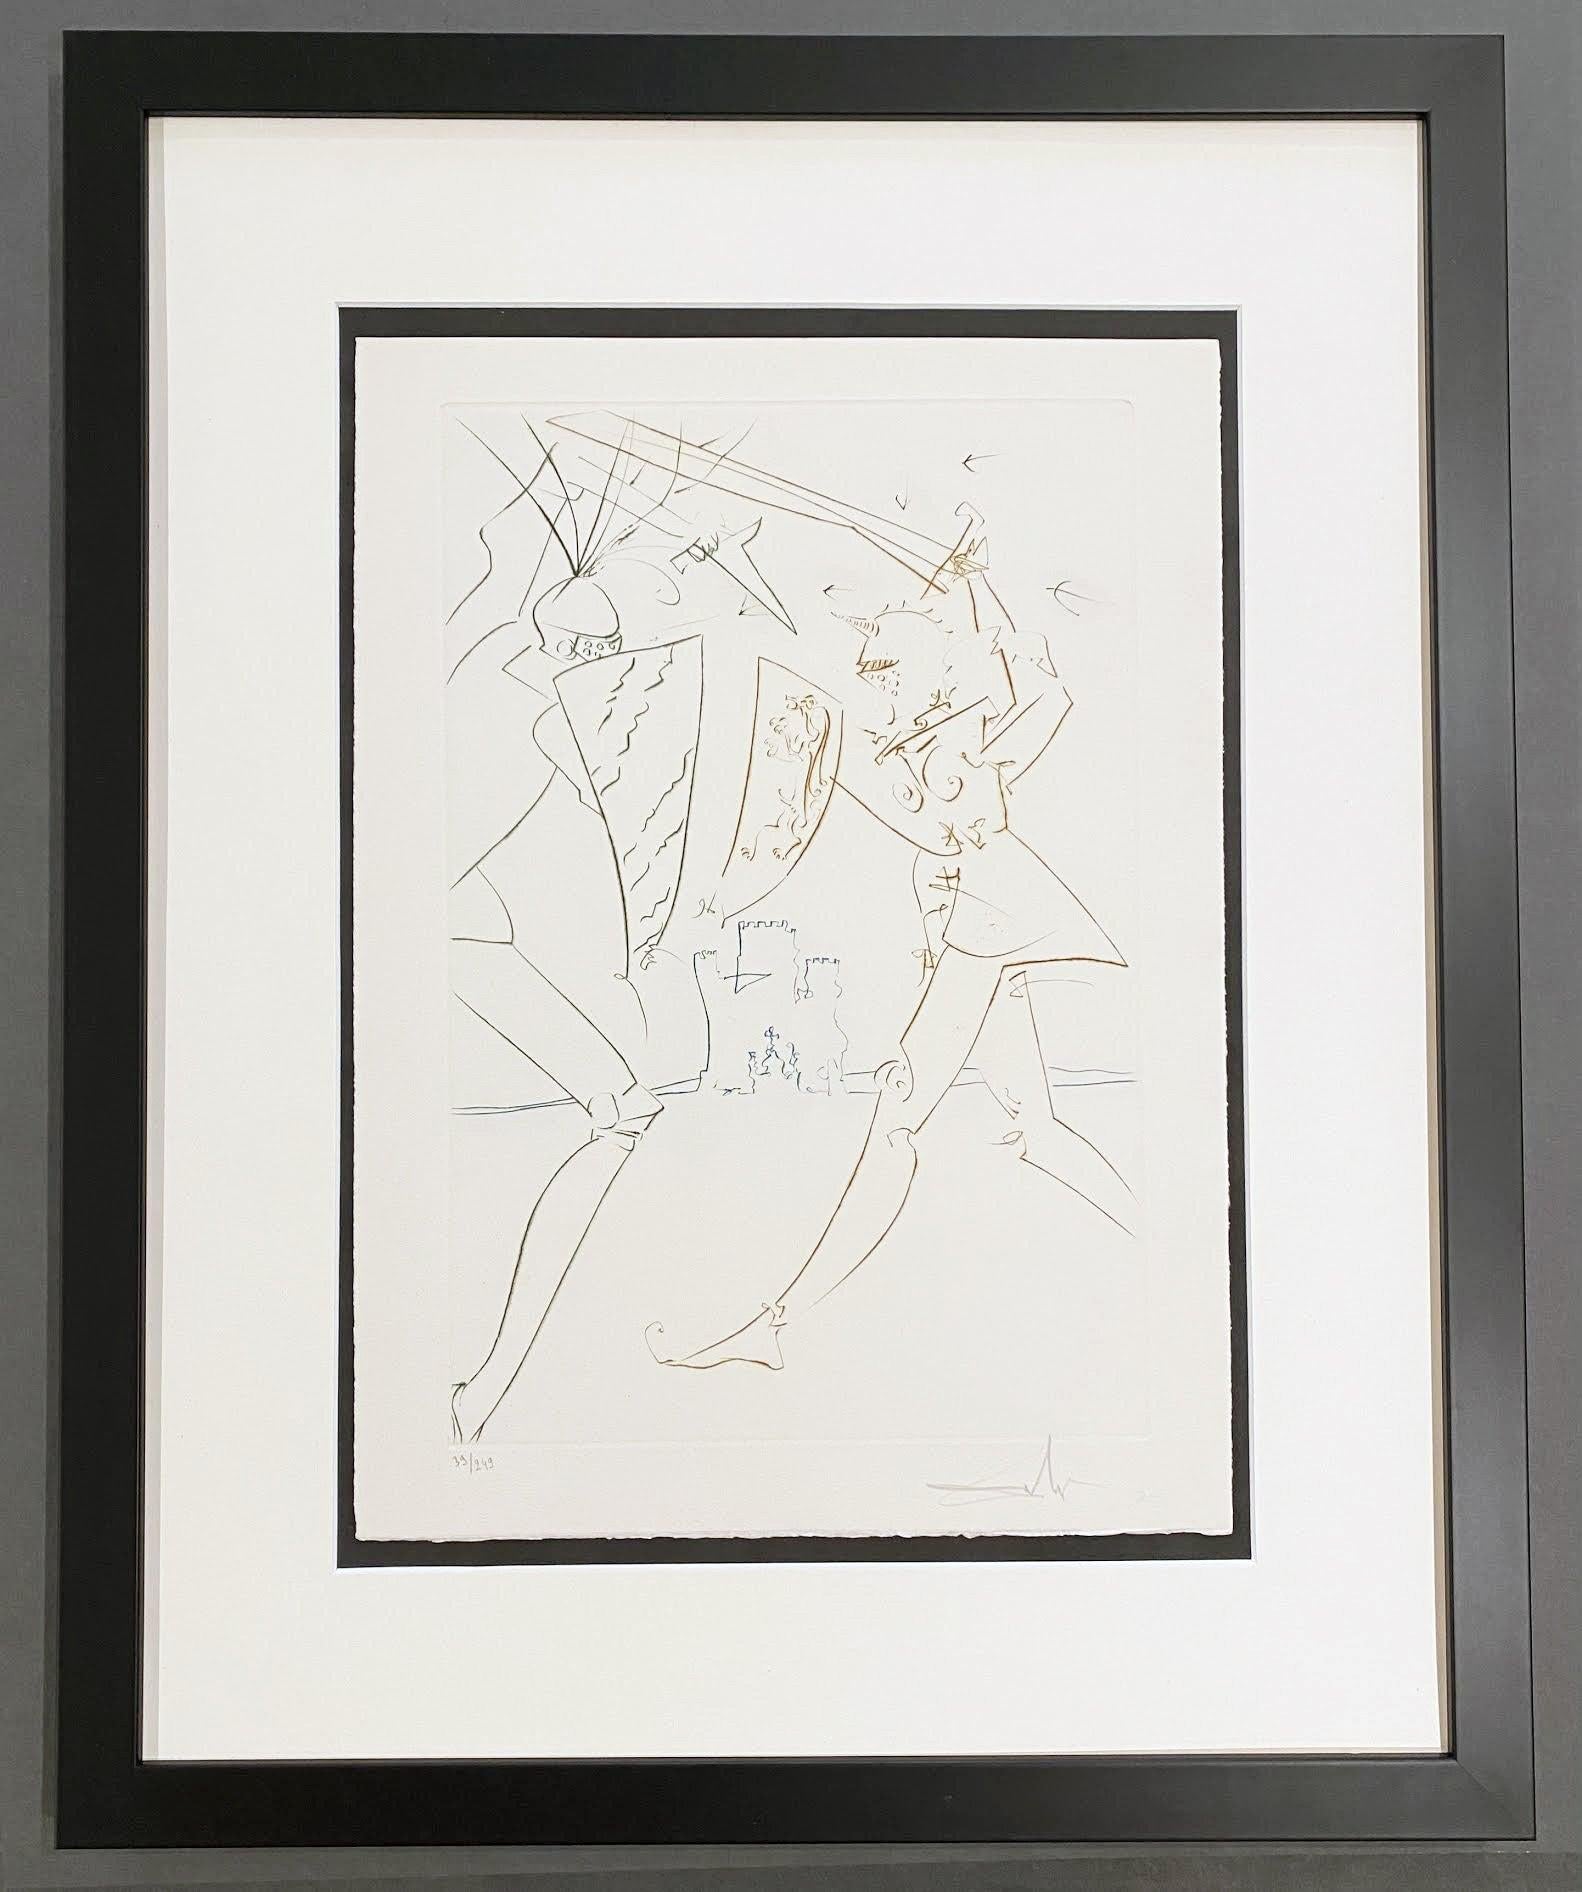 The Pass of Gadalore, from The Quest for the Grail  - Print by Salvador Dalí